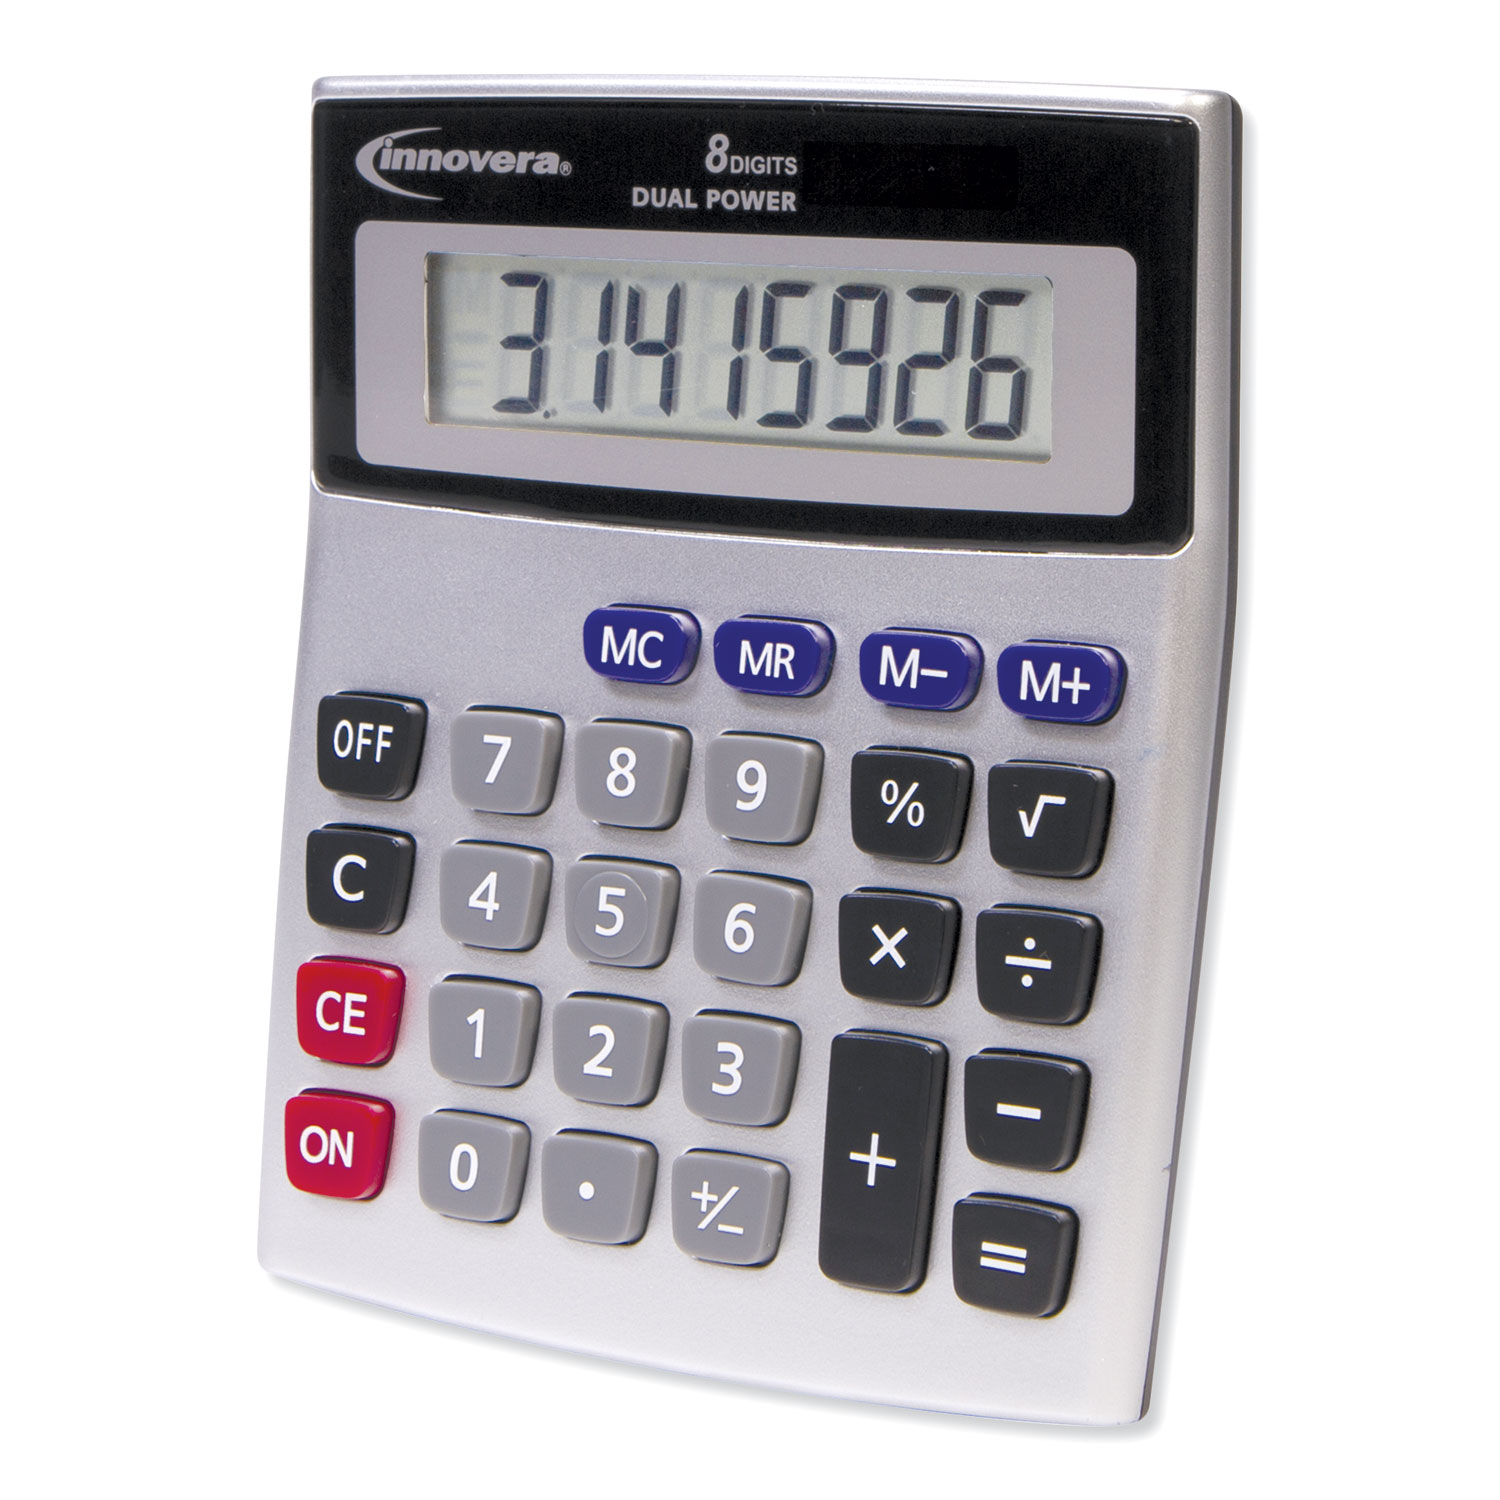 8 Digits Display Desktop Calculator Dual Power with Sound Business & Accounts 